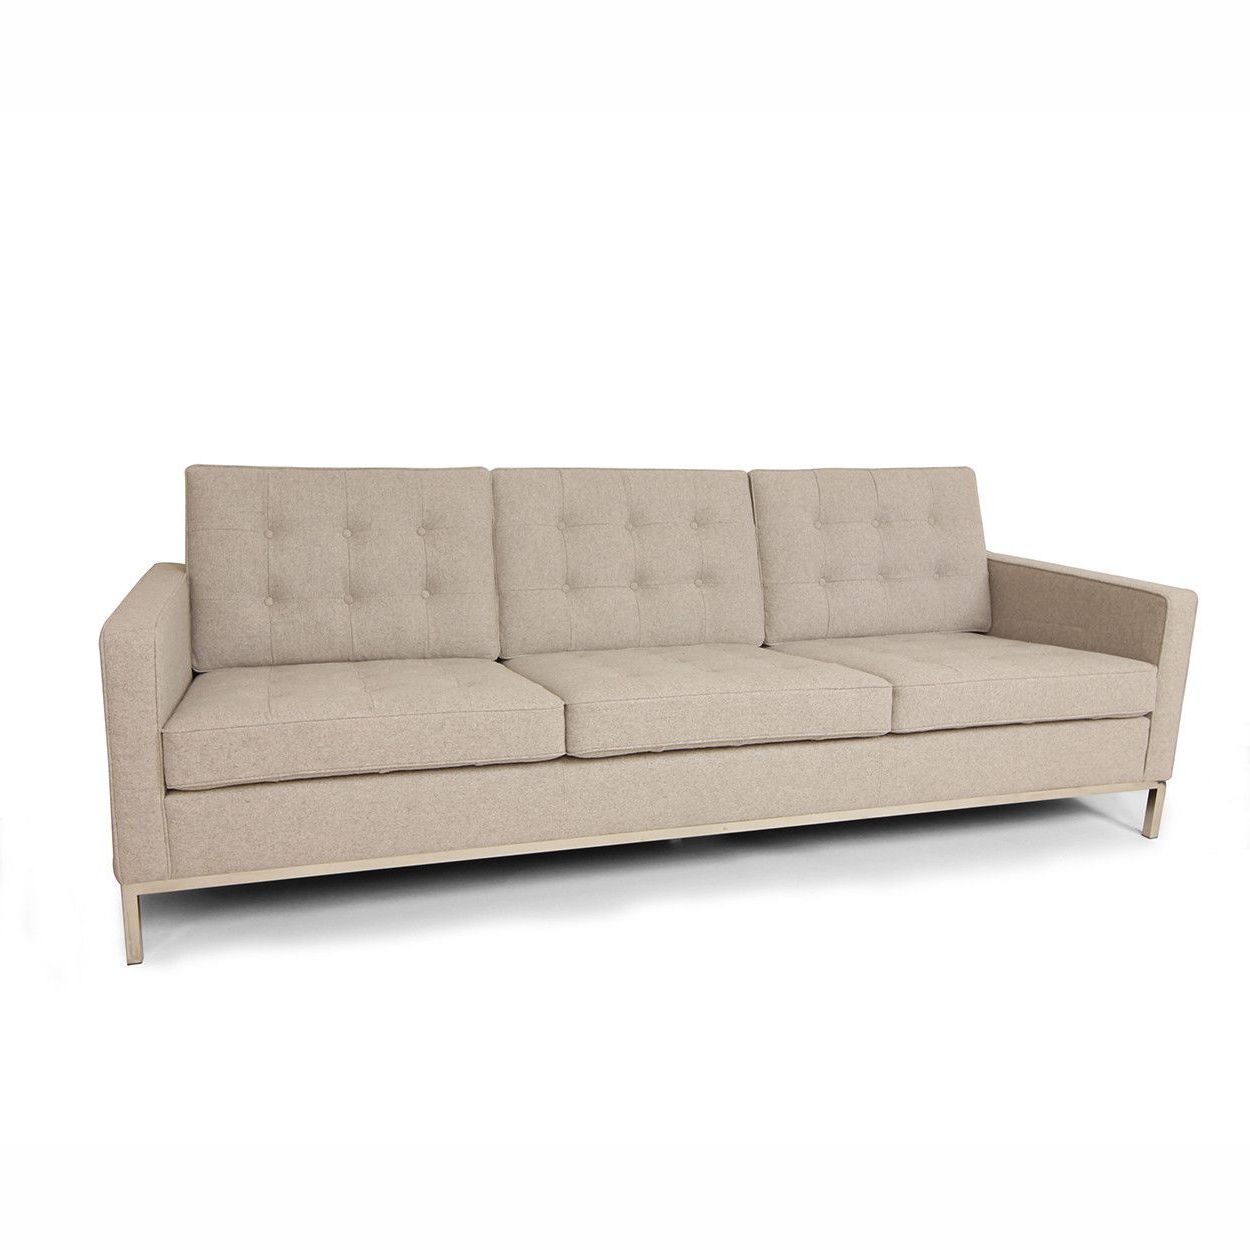 Well Liked $1799 Mid Century Modern Reproduction Tufted Sofa – Wool Inside Florence Mid Century Modern Left Sectional Sofas (Photo 23 of 25)